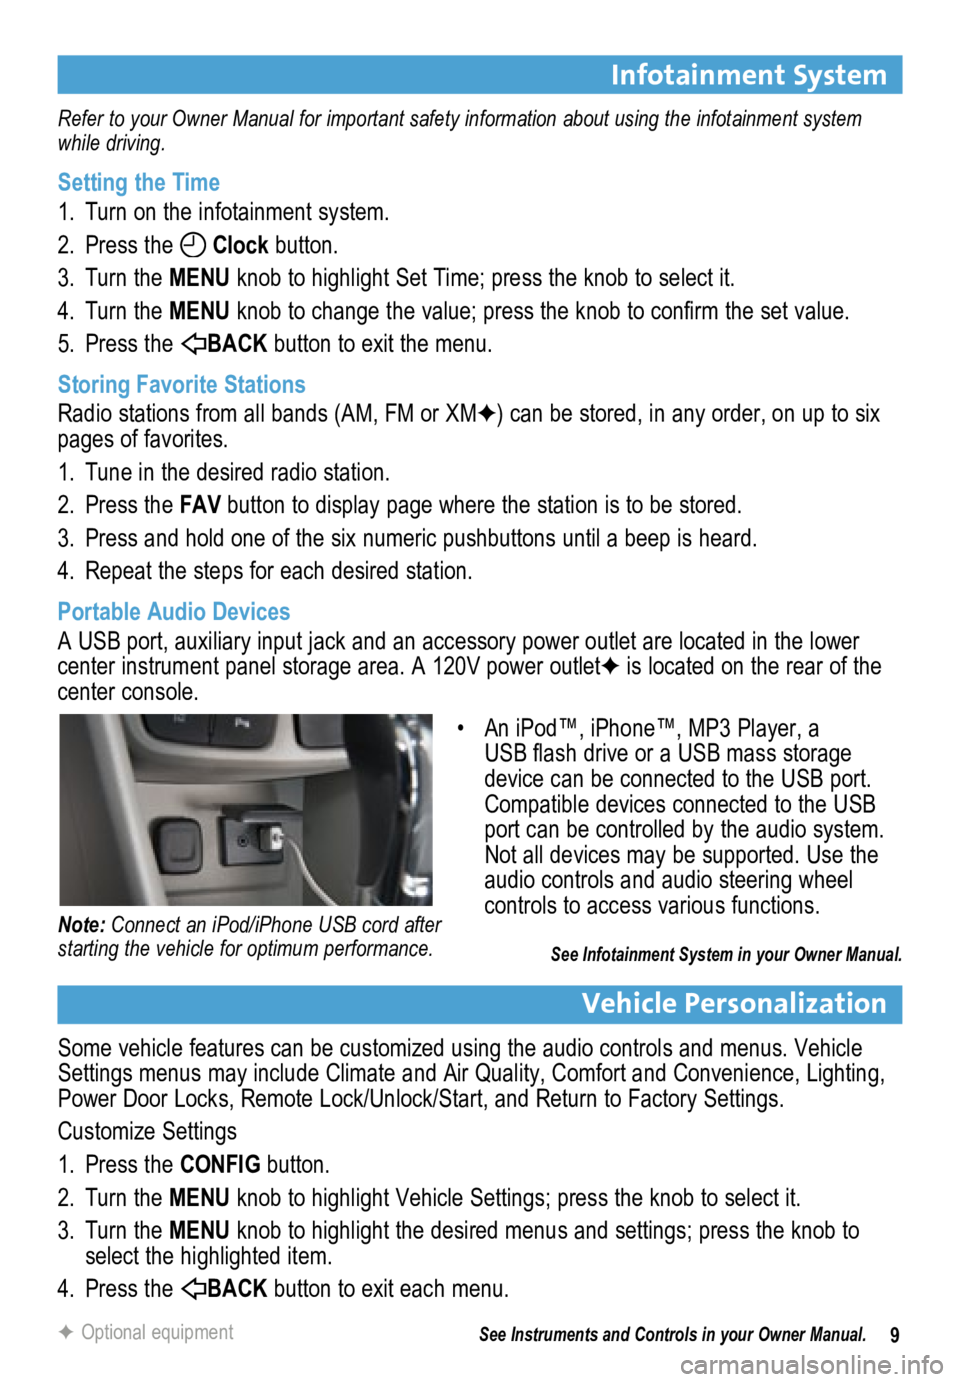 BUICK ENCORE 2013  Get To Know Guide 9
Infotainment System
Refer to your Owner Manual for important safety information about using the infotainment system 
while driving.
Setting the Time
1. Turn on the infotainment system.
2.  Press the